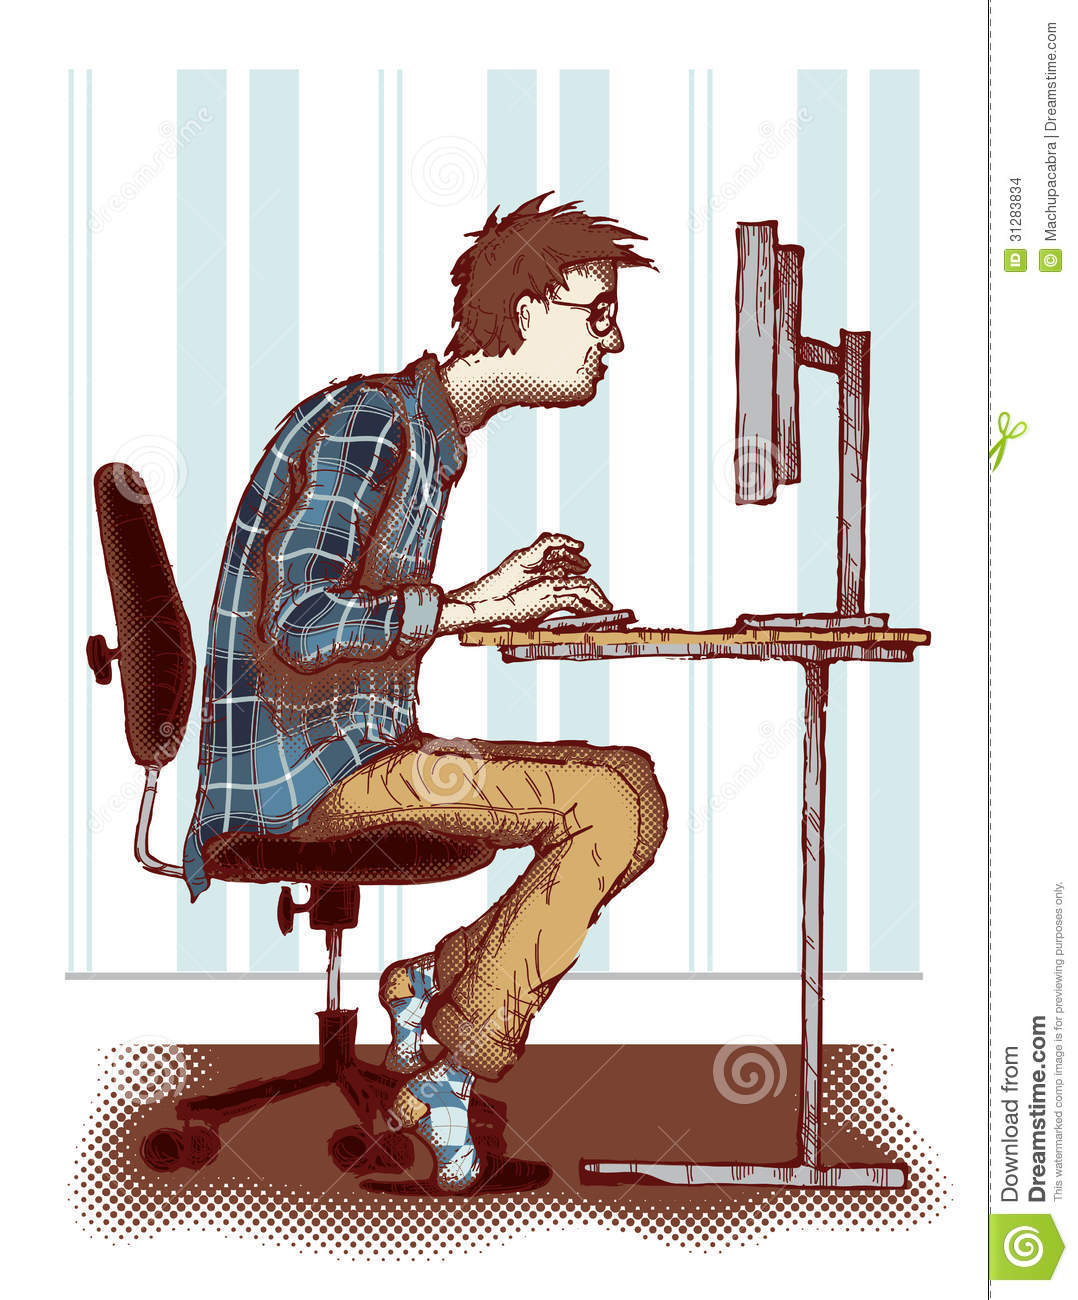 Computer Addiction Stock Images   Image  31283834